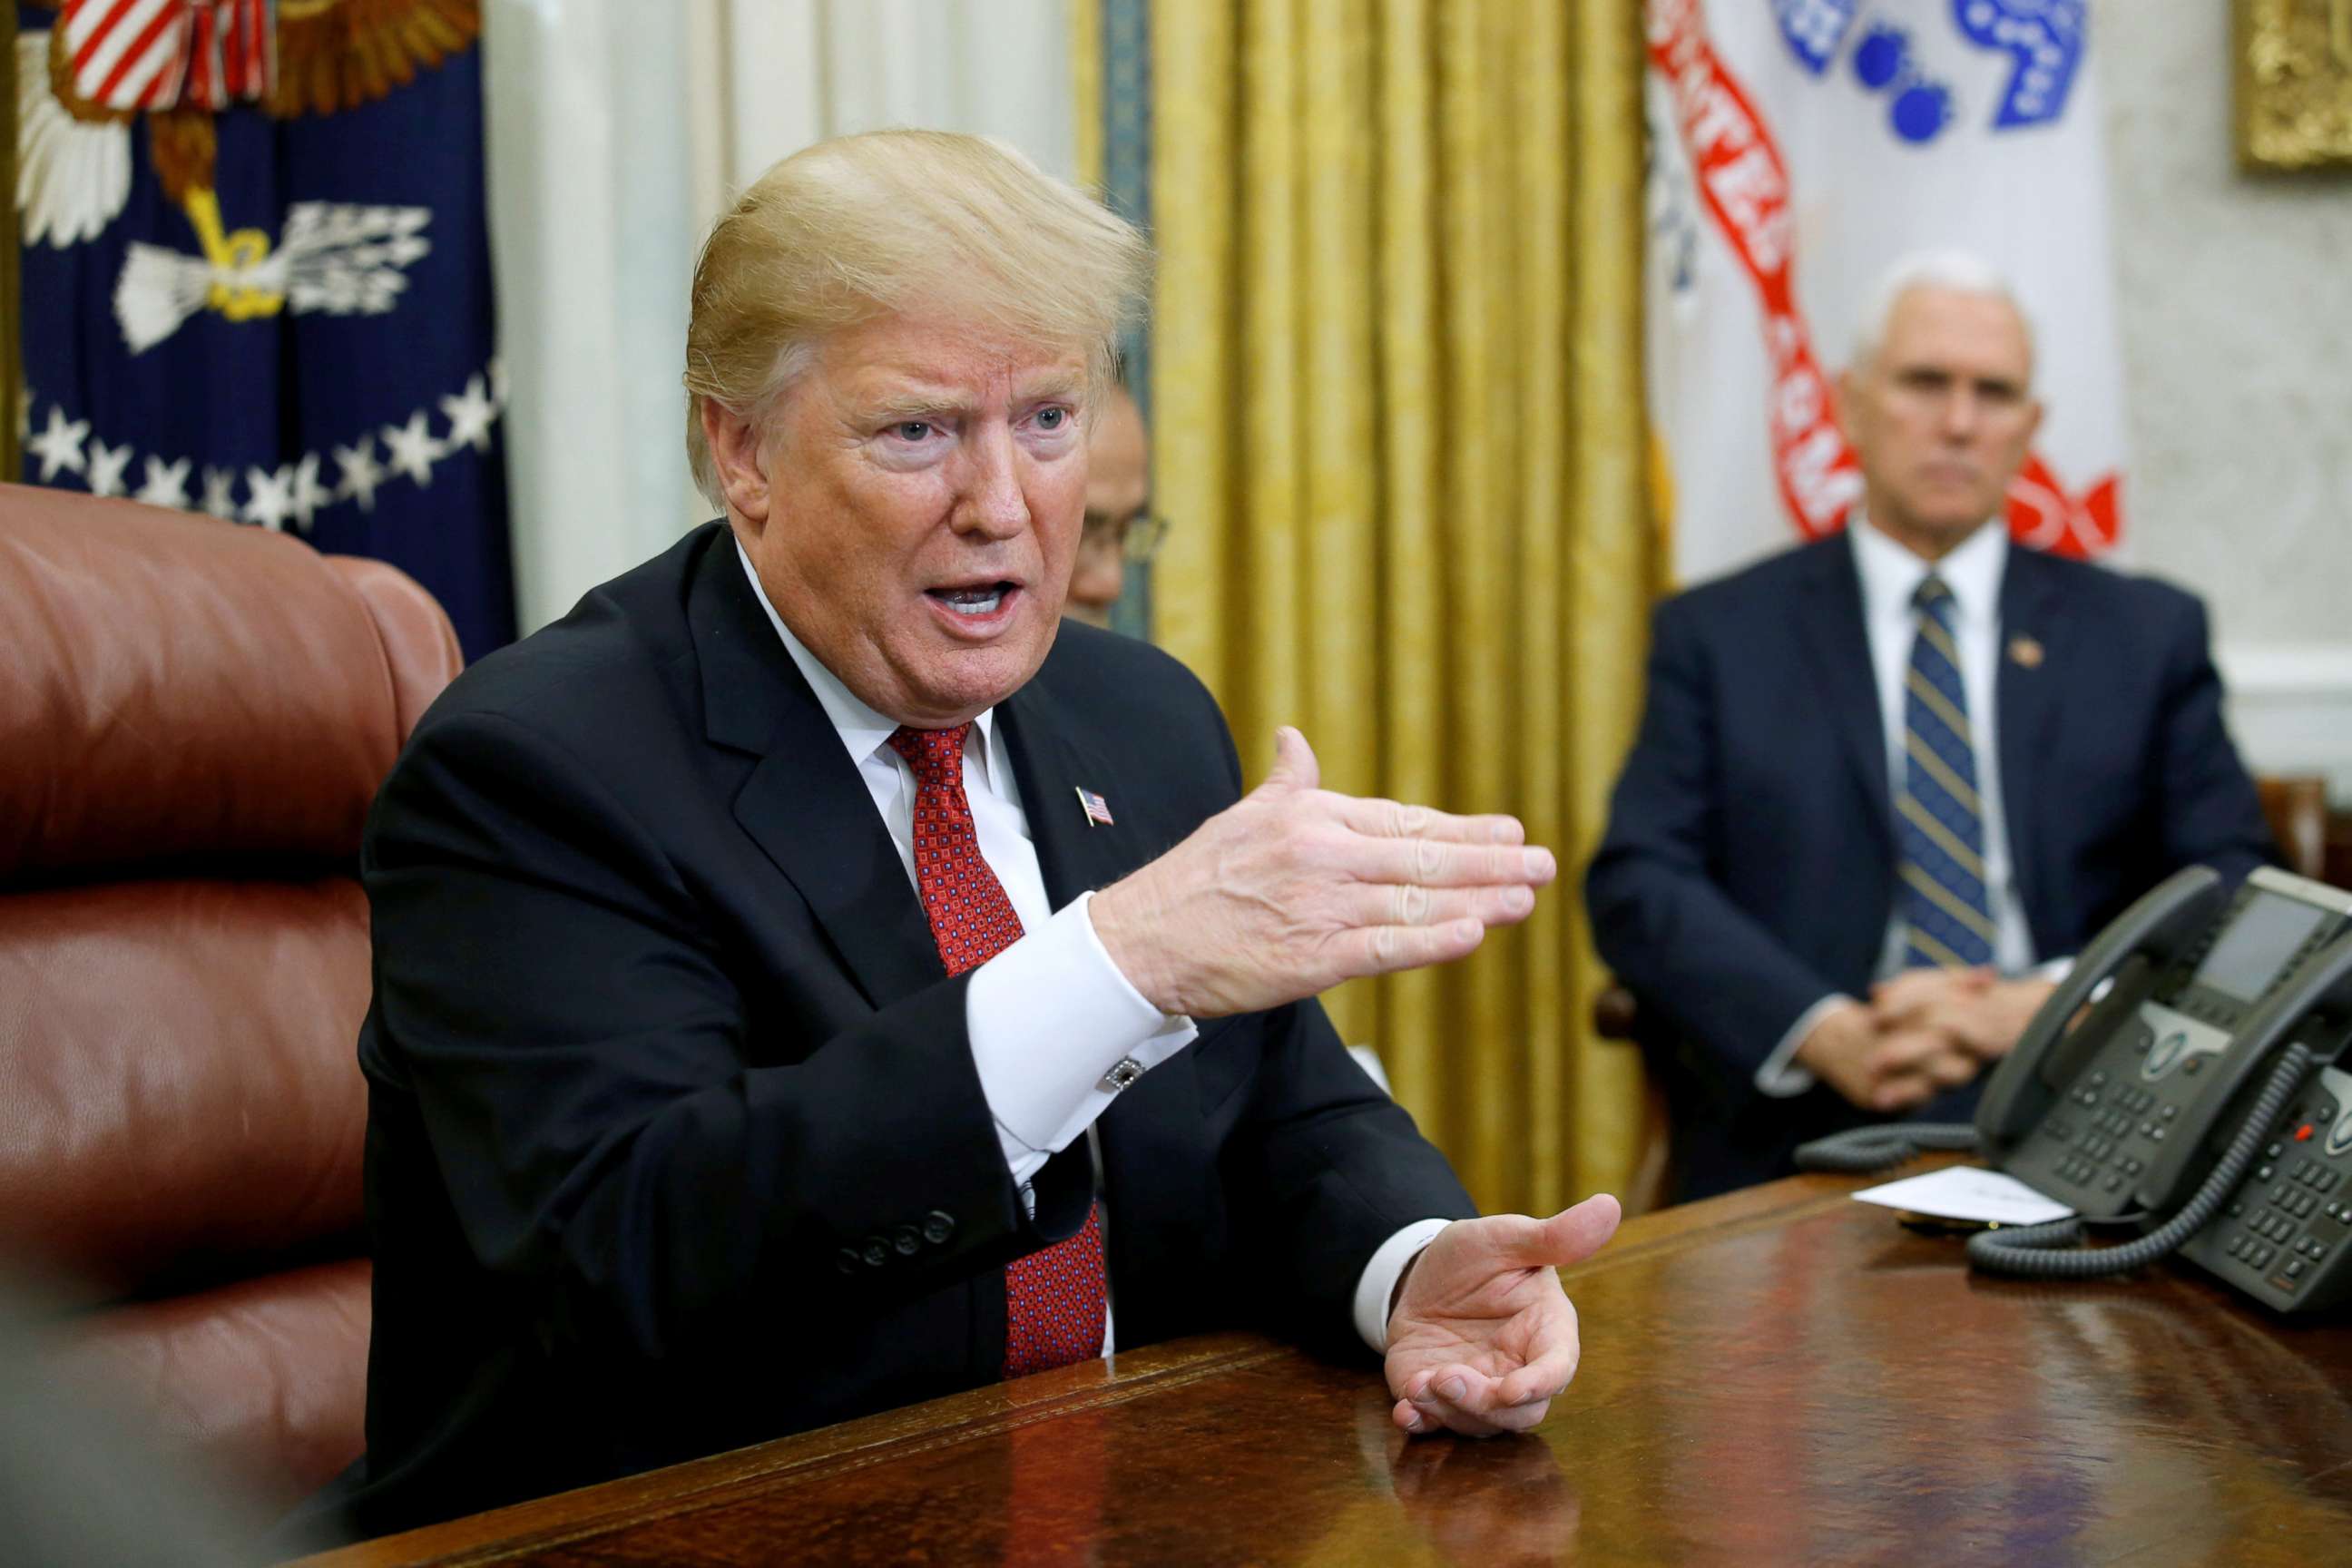 PHOTO: President Donald Trump speaks to China's Vice Premier Liu He as Vice President Mike Pence looks on during a meeting in the Oval Office of the White House in Washington, Jan. 31, 2019.